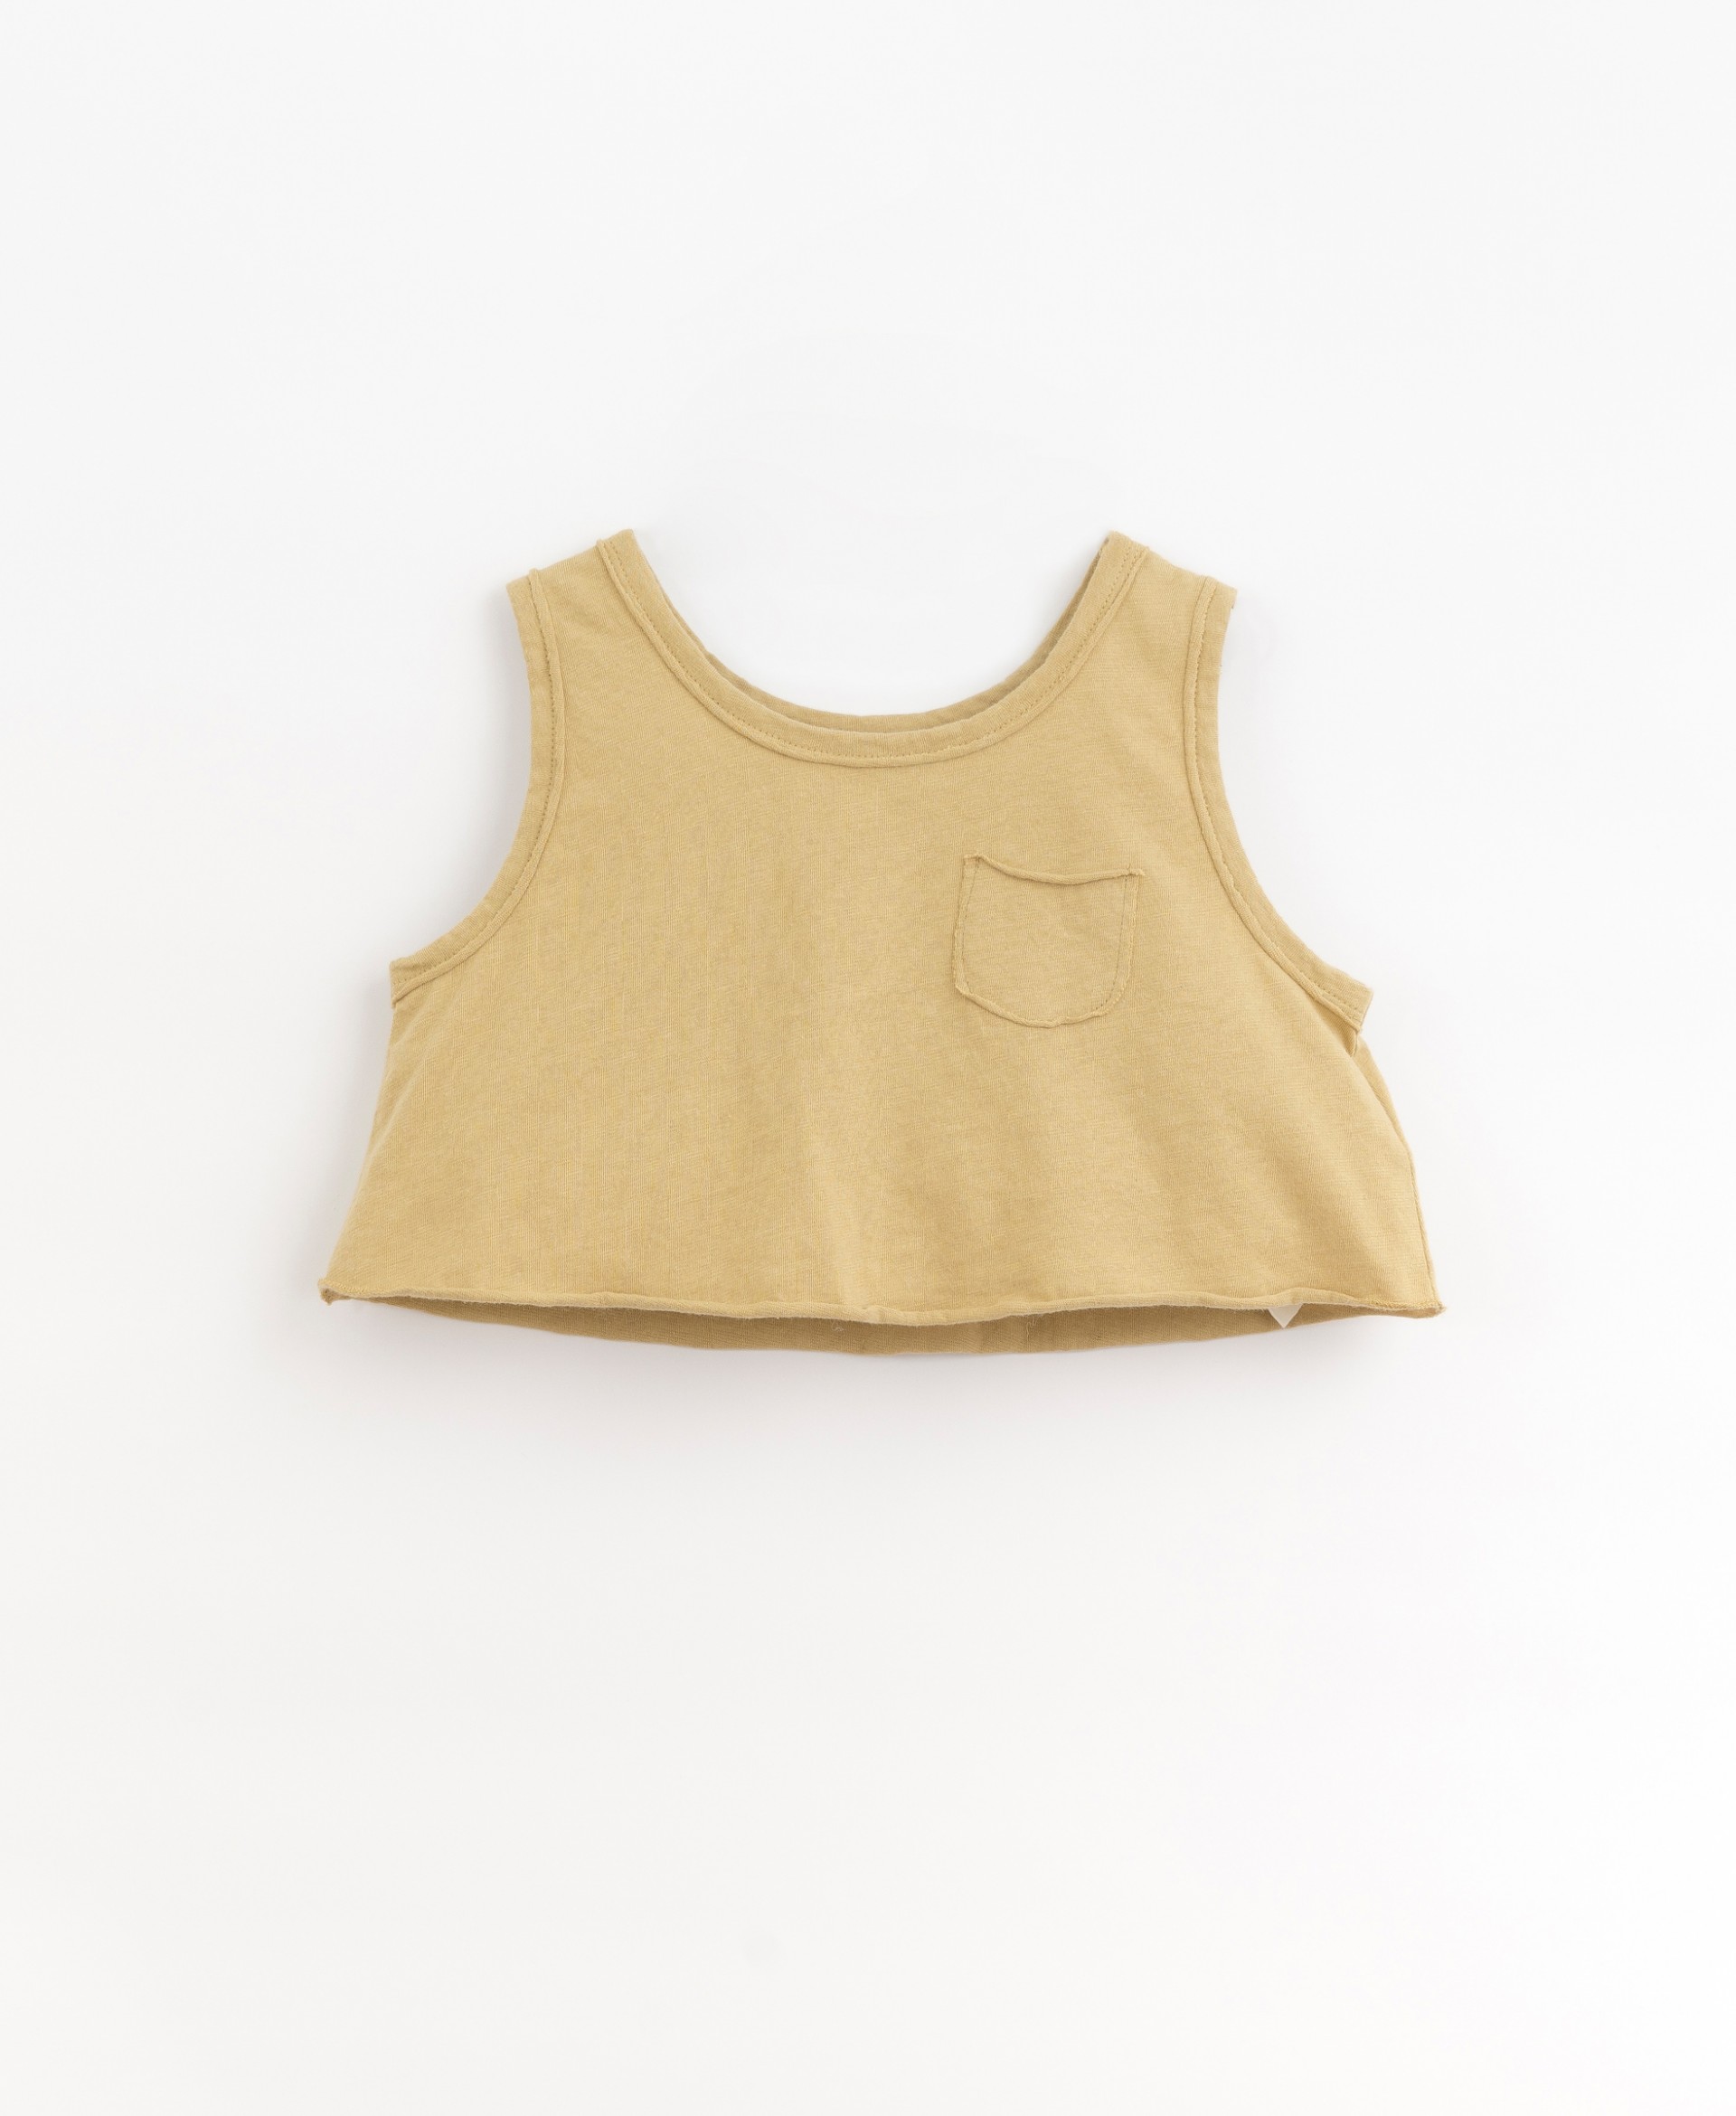 Top made of a mixture of natural fibres | Organic Care